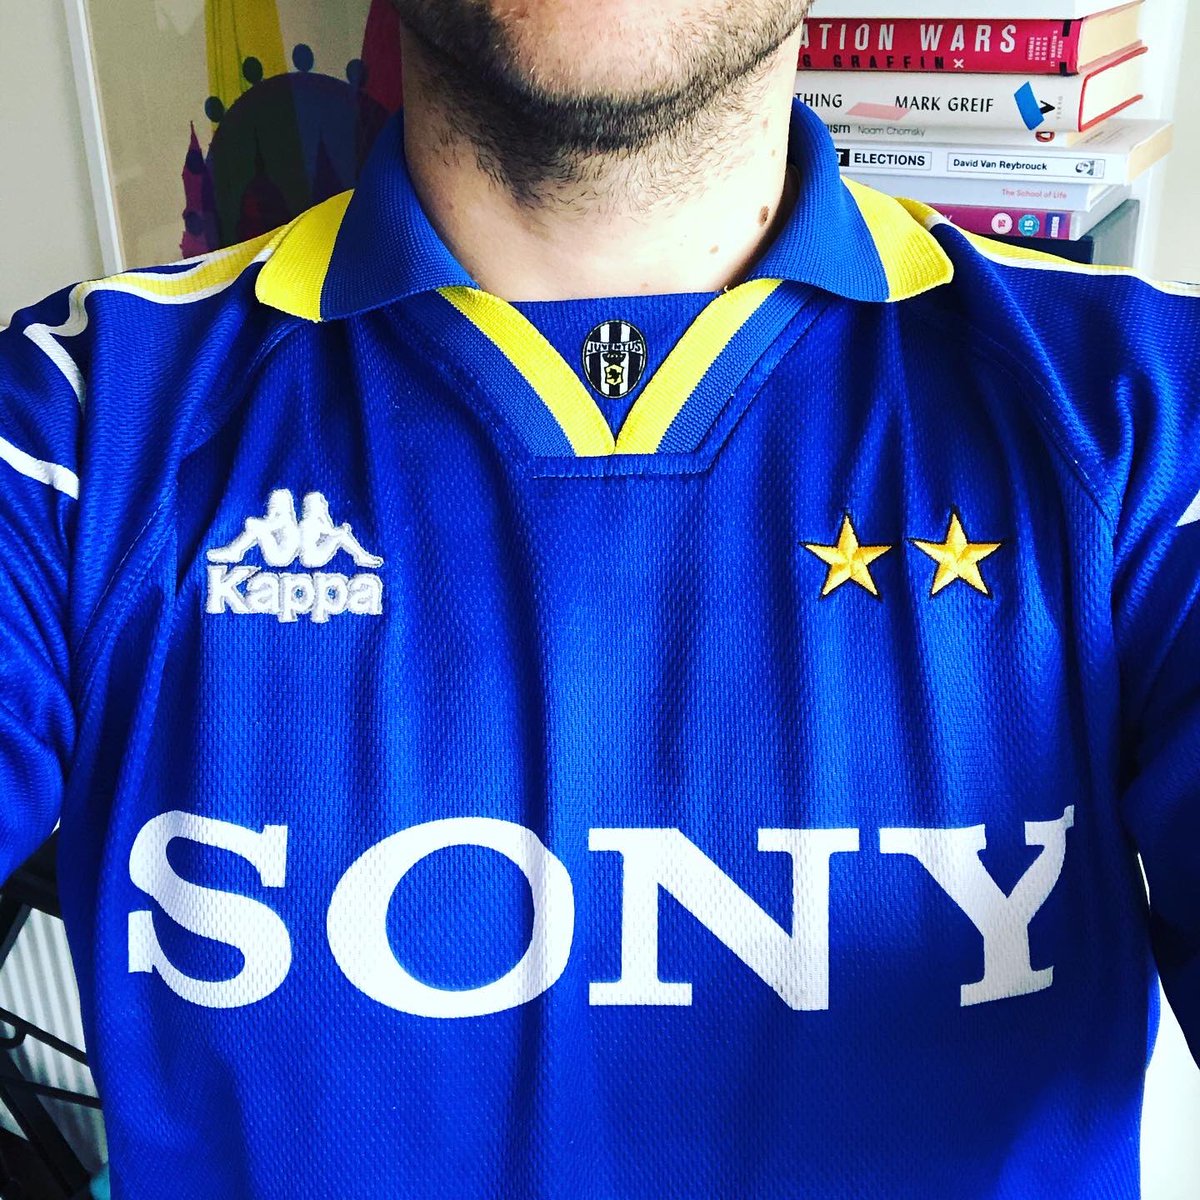 . @juventusfcenAway Kit, 1996/97KappaI hope my fellow interisti will find it in their hearts to forgive me for this. This is the only Juve shirt in my collection. I still remember falling in love with this kit when I first saw it as a kid #HomeShirts